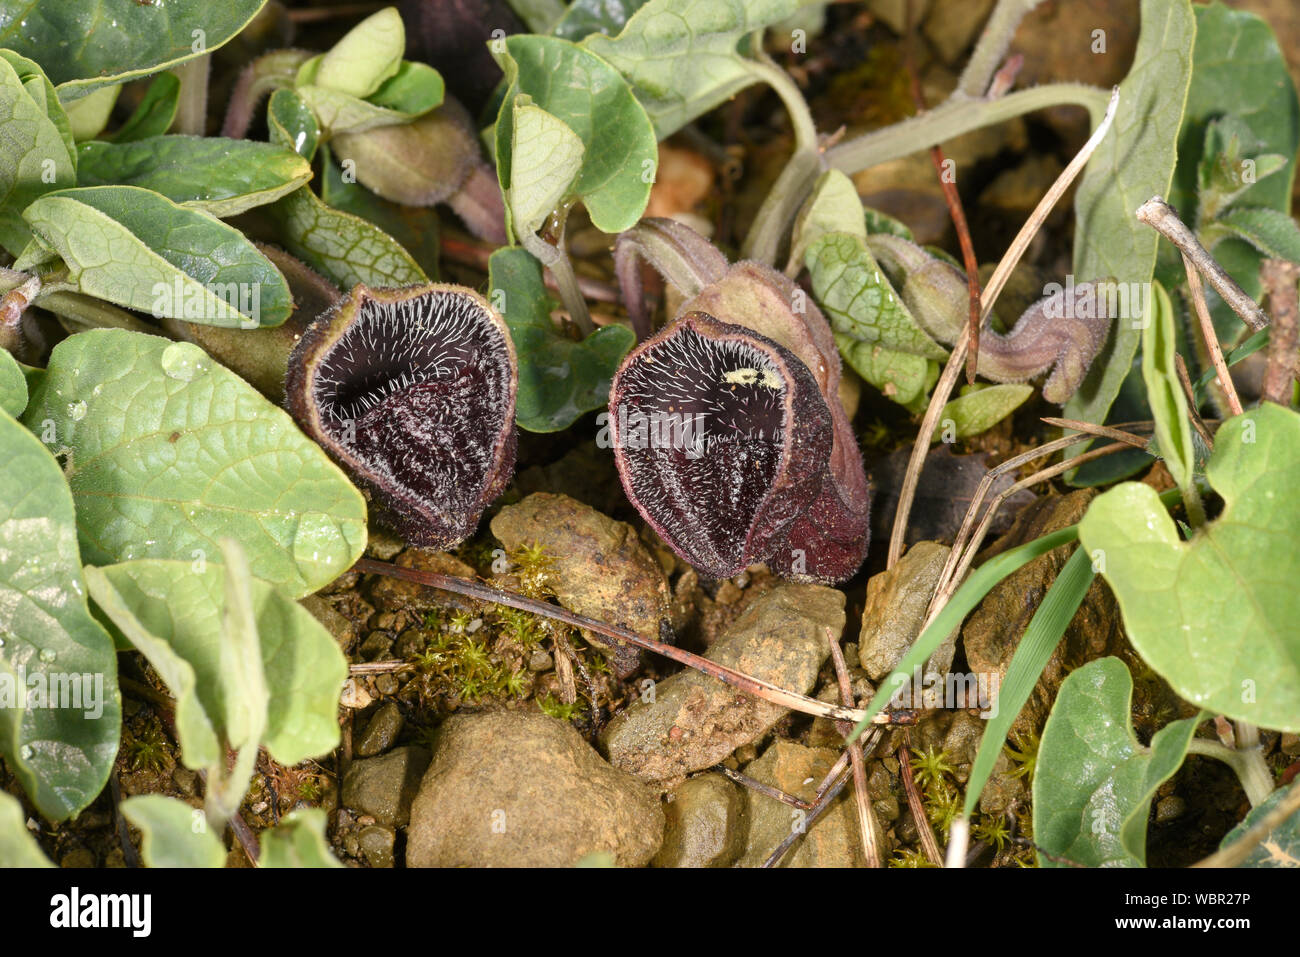 Birthwort or Dutchman's Pipe, (Aristolochia species) in flower, showing pipe shape from which it is named, Rhodes, Greece, April Stock Photo